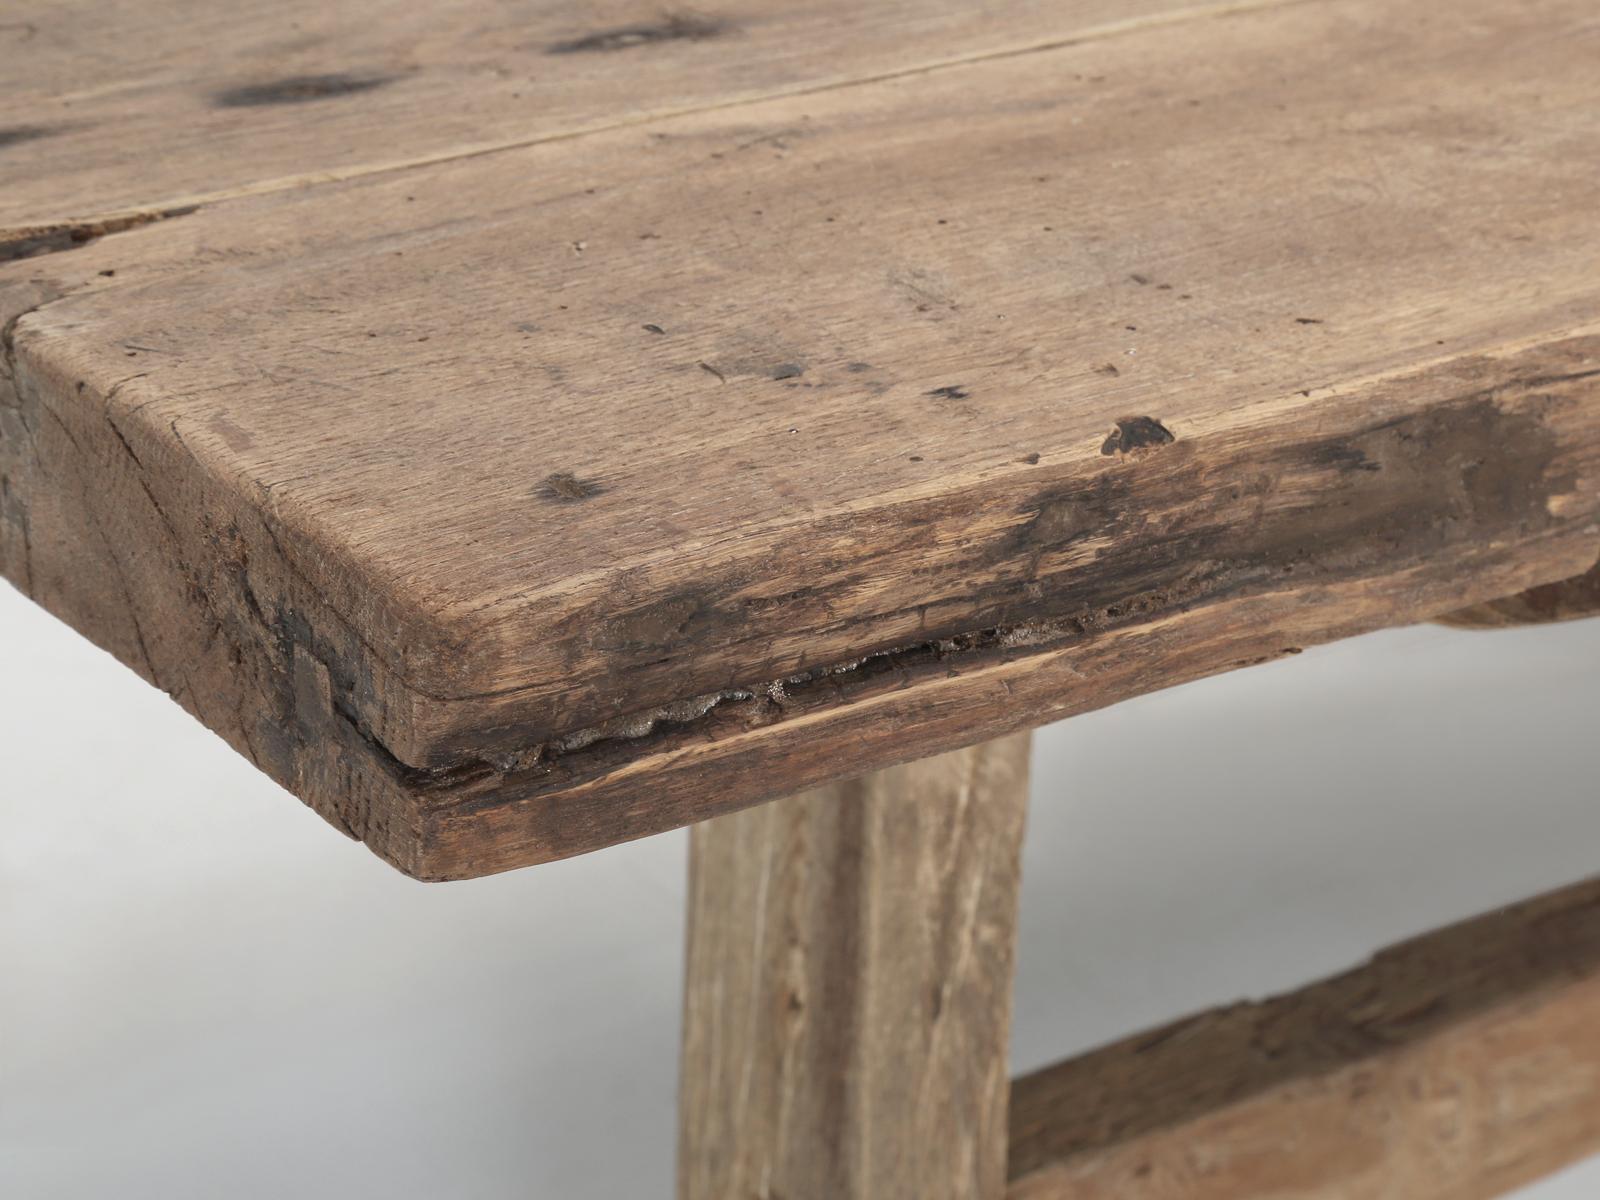 Hand-Crafted Antique Country French Rustic Trestle Dining Table in White Oak from the 1700s